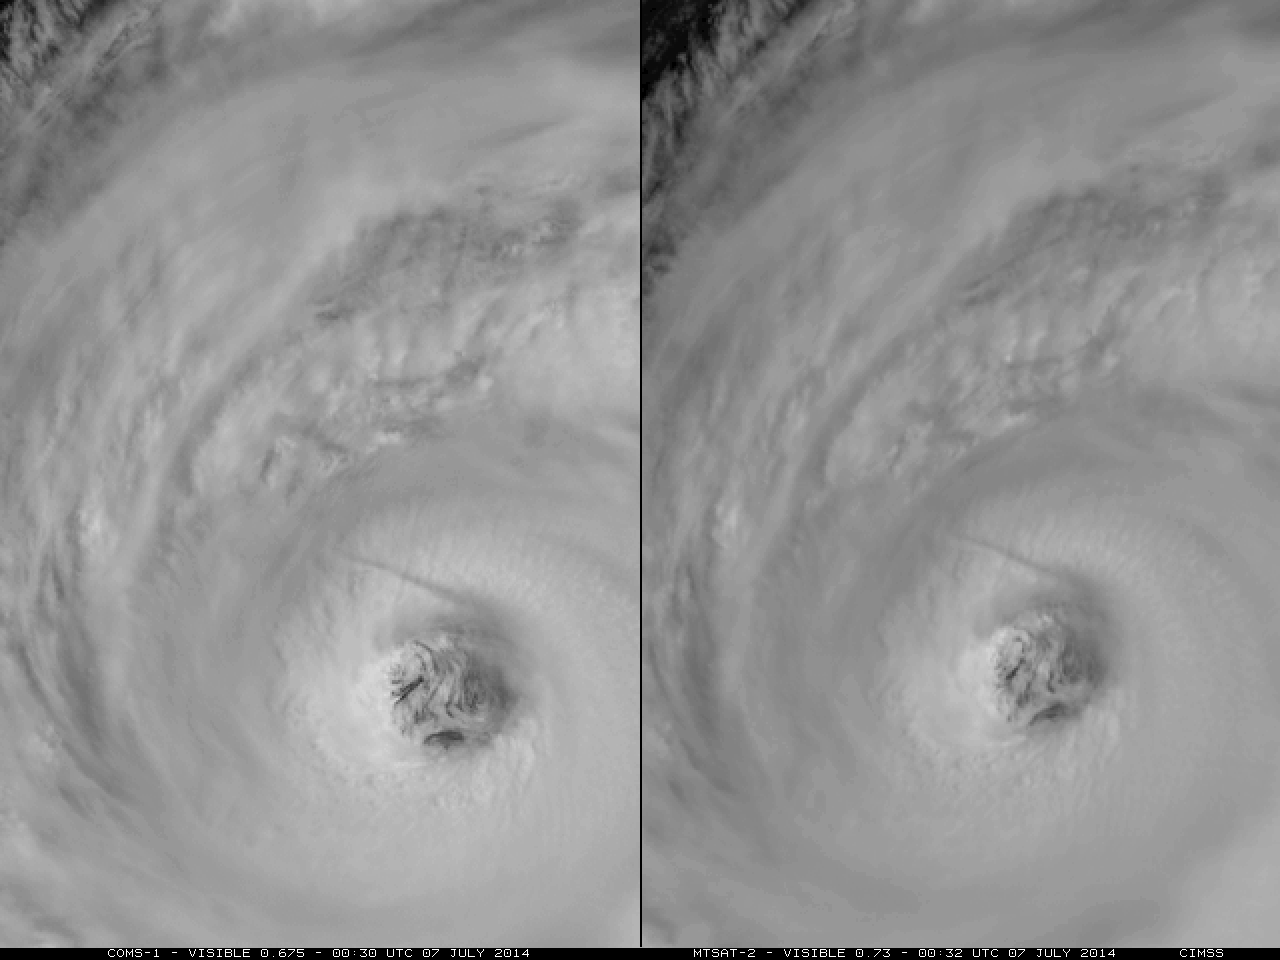 COMS-1 (left) and MTSAT-2 (right) visible channel images [click to play animation]